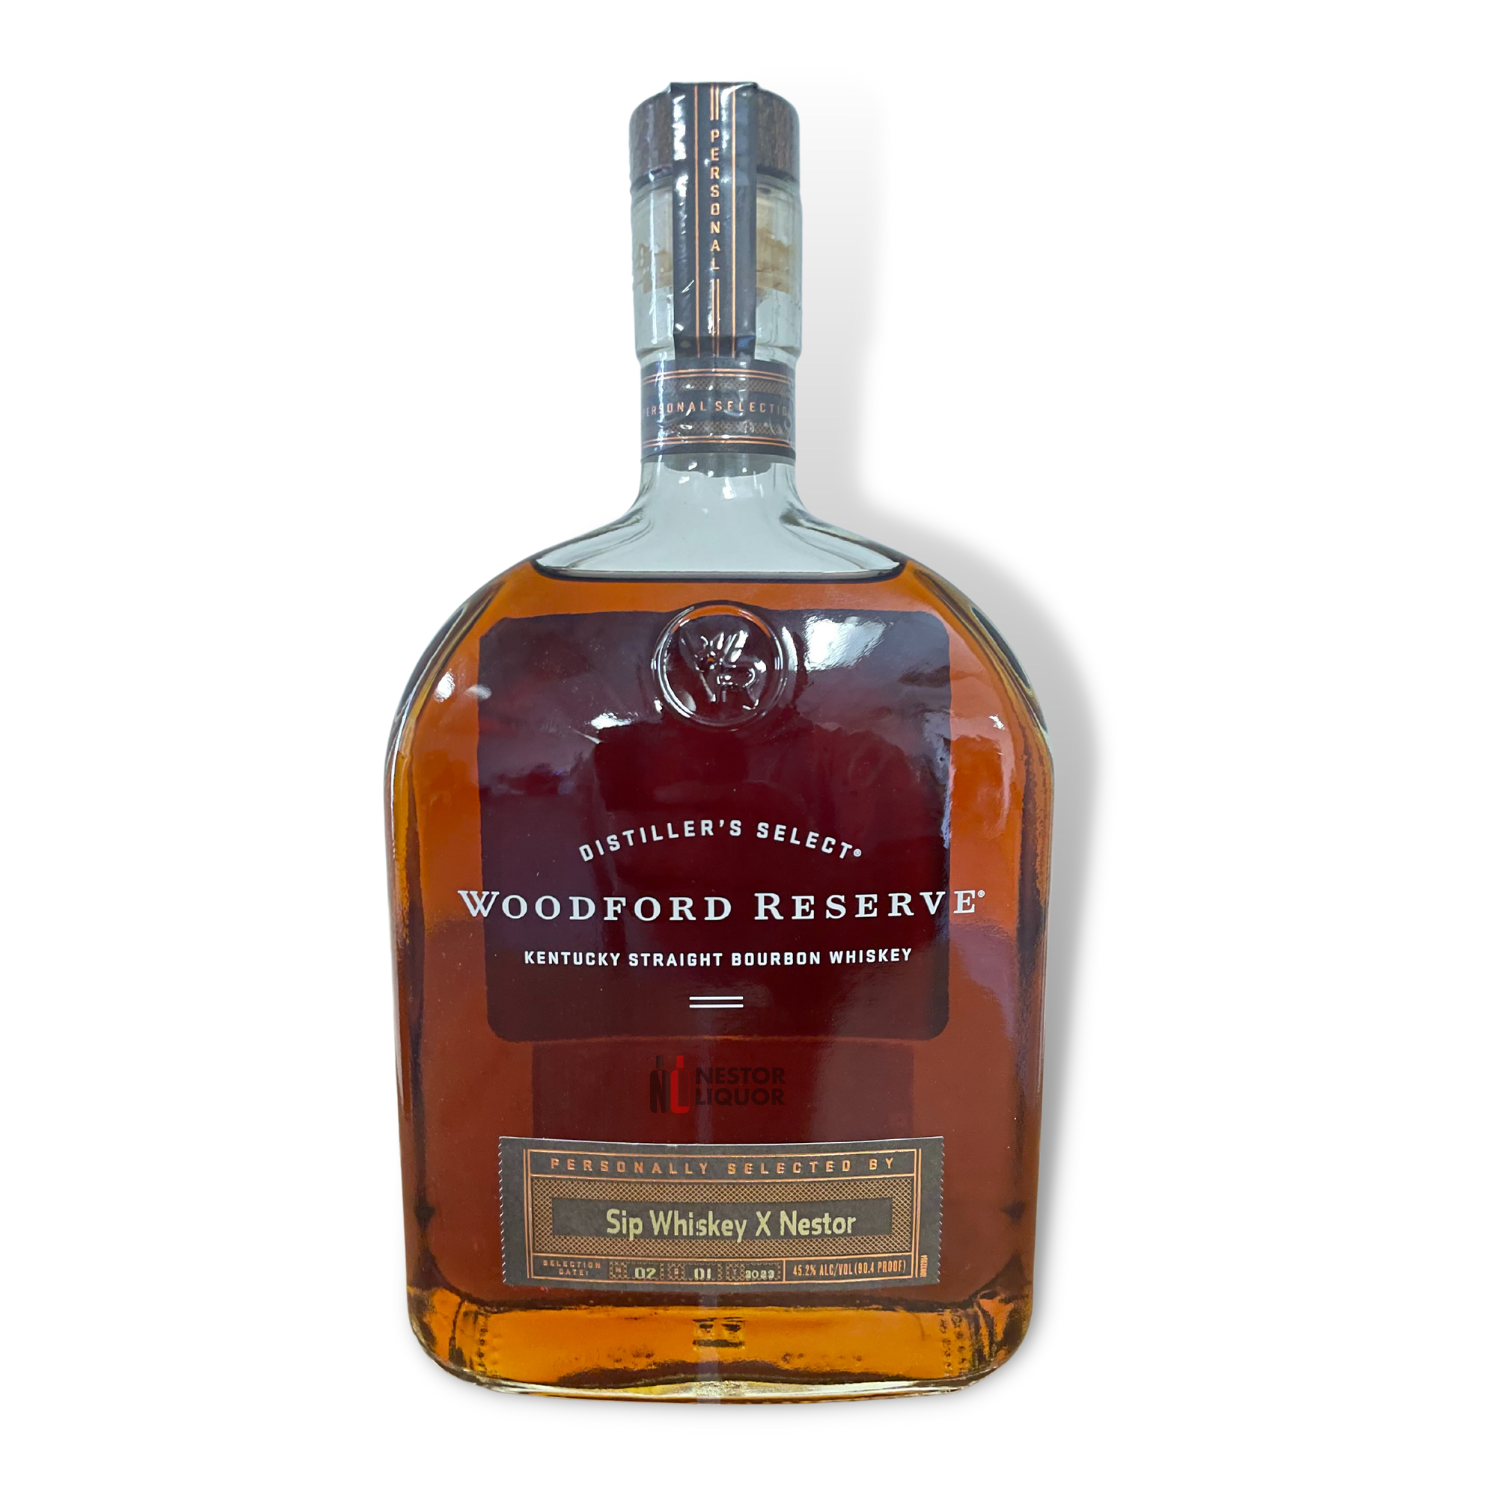 Woodford Reserve Personal Selection Sip Whiskey - Nestor Liquor